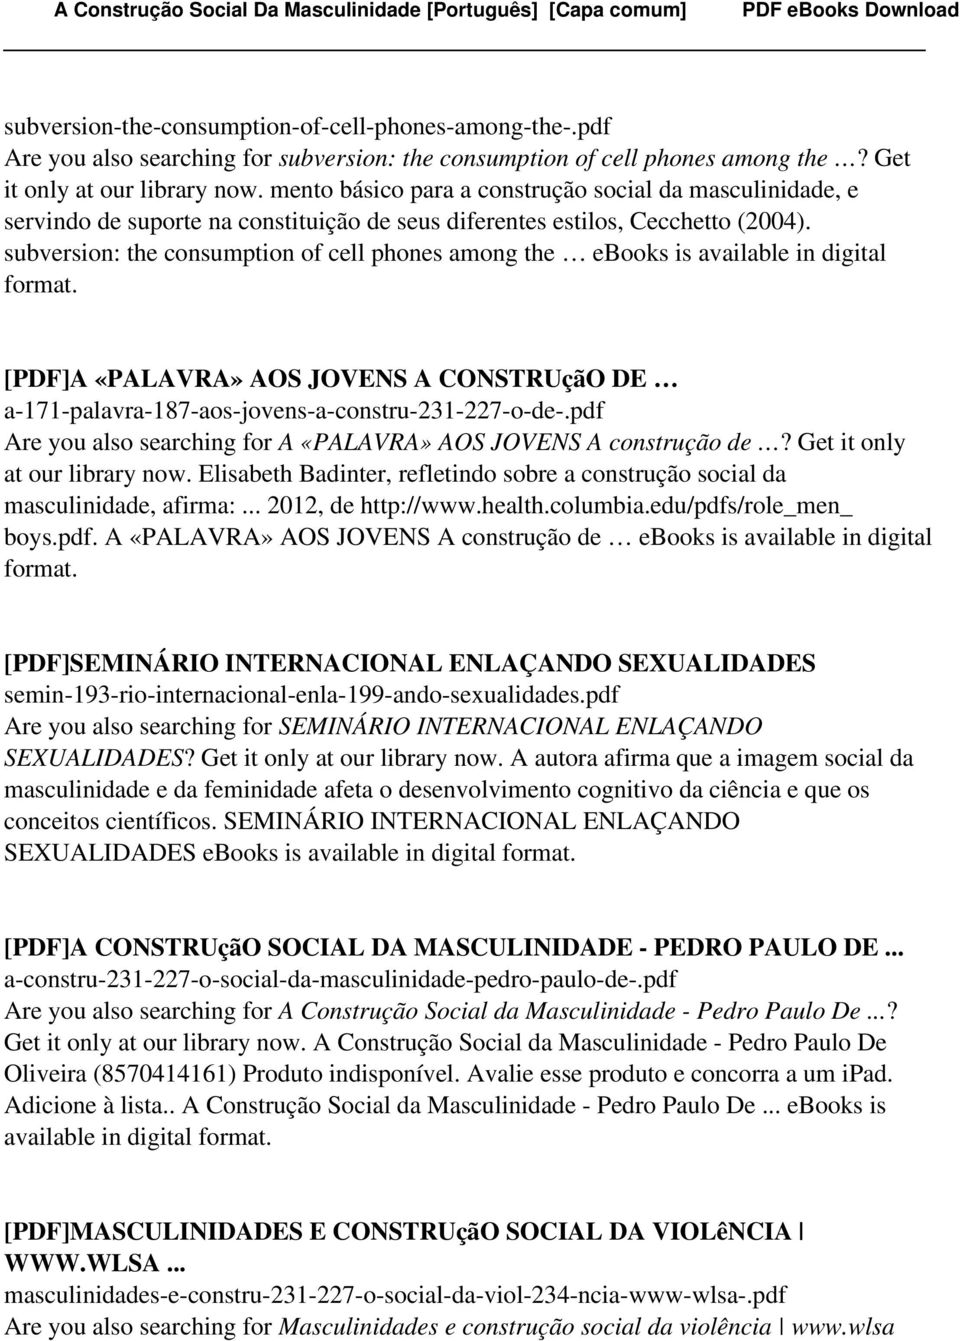 subversion: the consumption of cell phones among the ebooks is available in digital format. [PDF]A «PALAVRA» AOS JOVENS A CONSTRUçãO DE a-171-palavra-187-aos-jovens-a-constru-231-227-o-de-.